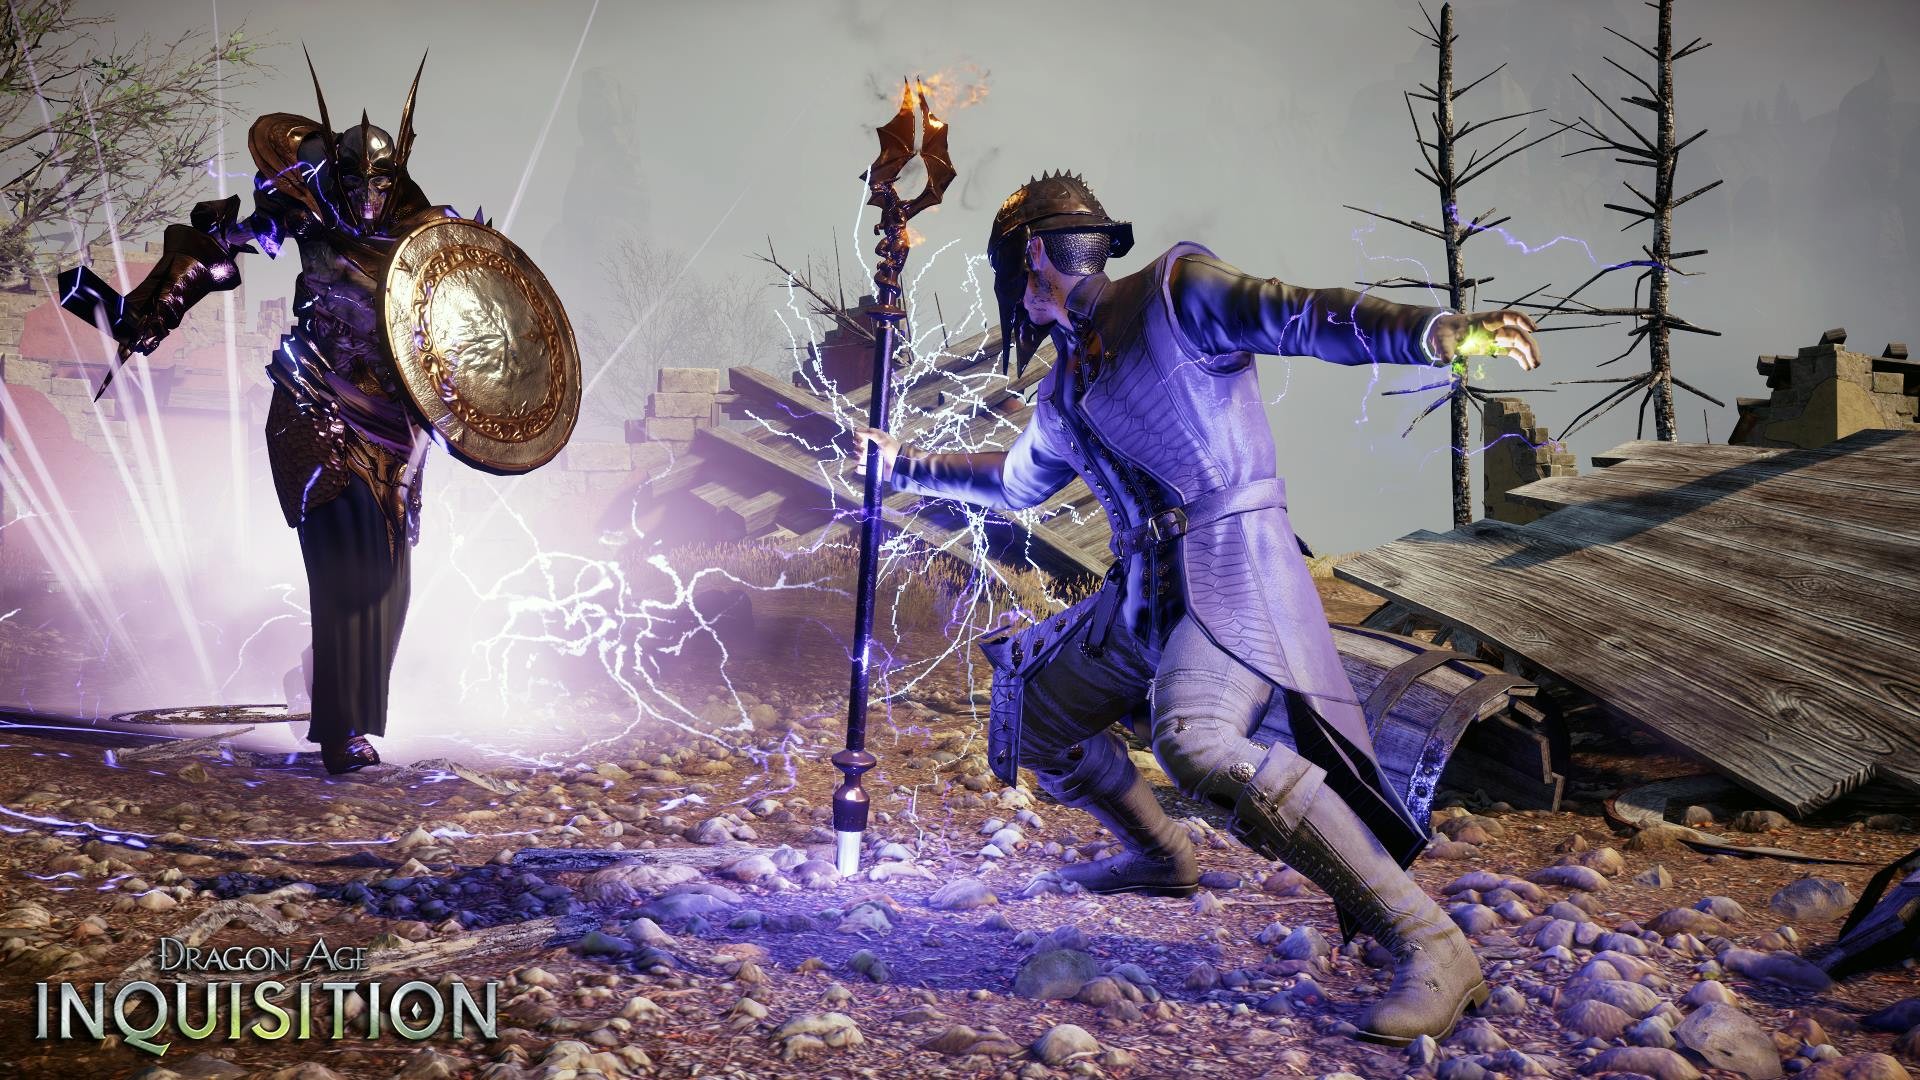 Dragon age inquisition update 1.12 download pc